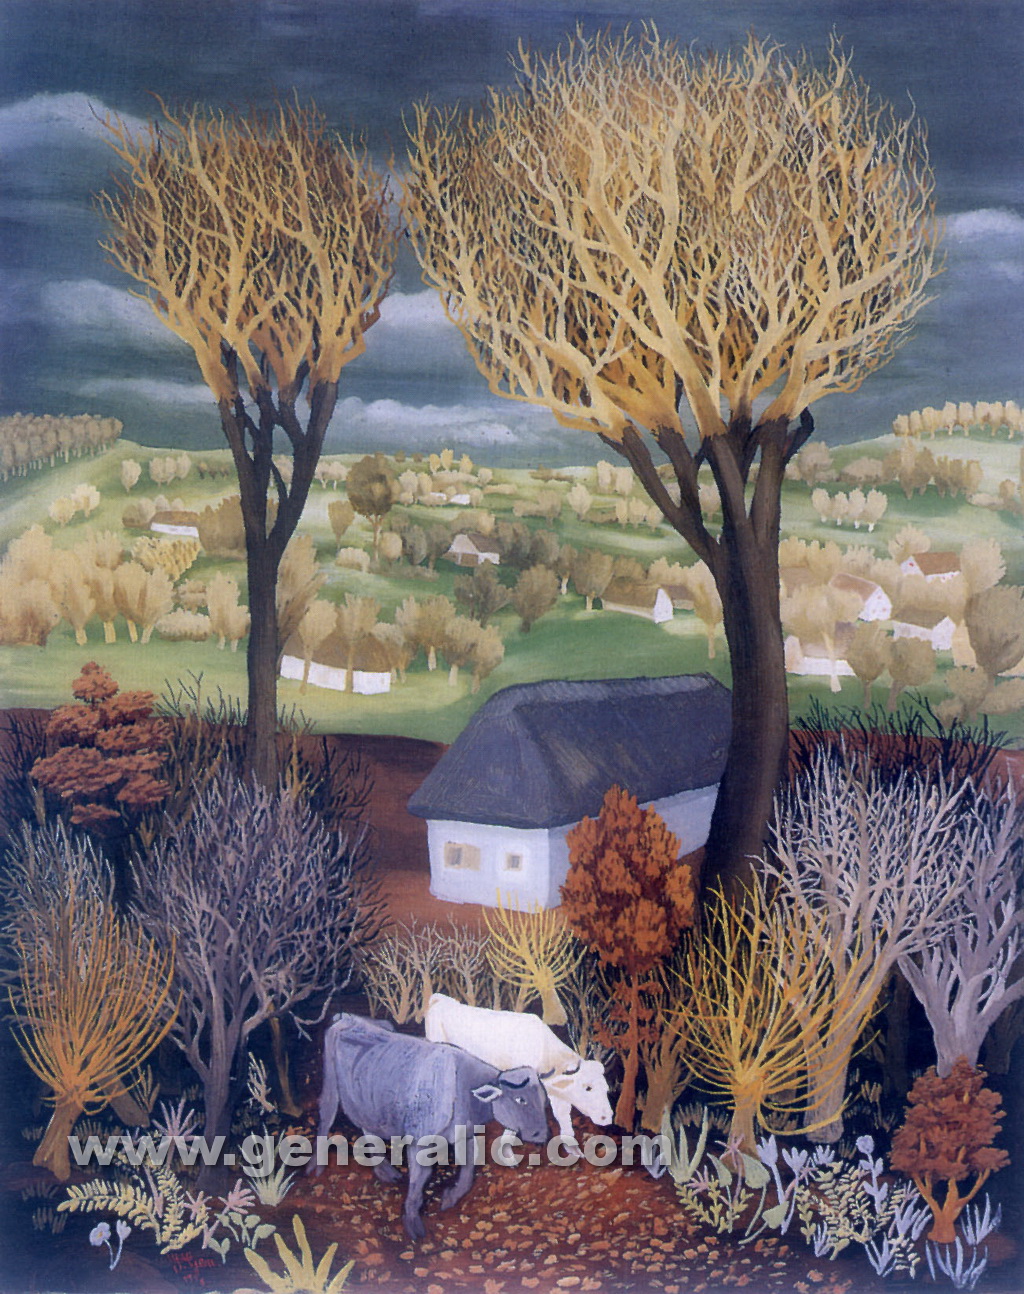 Ivan Generalic, 1938, Cows in the forest, oil on glass, 44x34 cm